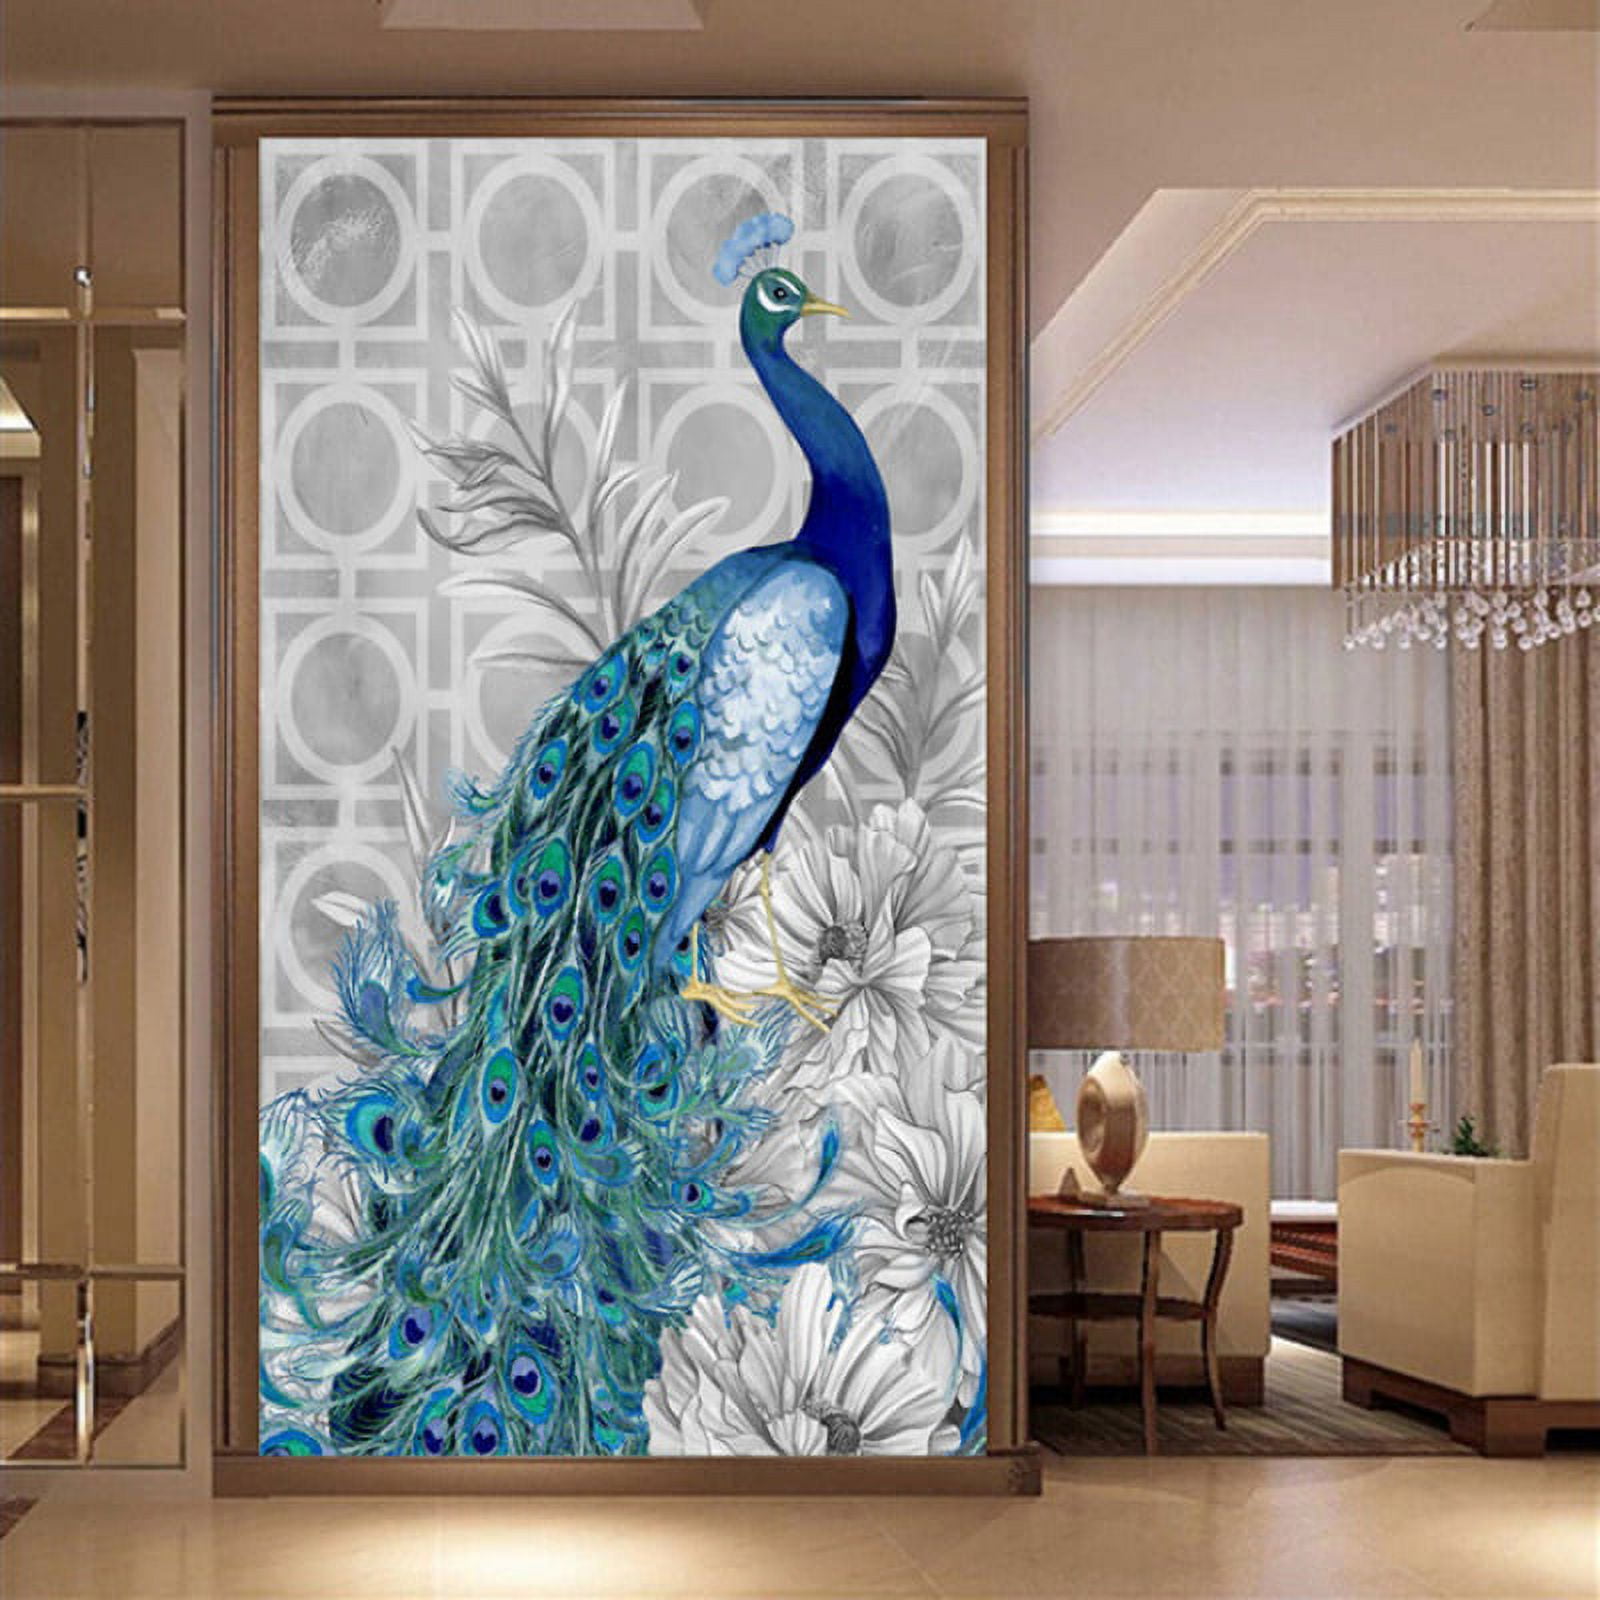 Fractal Peacock - 5D Diamond Painting - DIY 5D Painting with